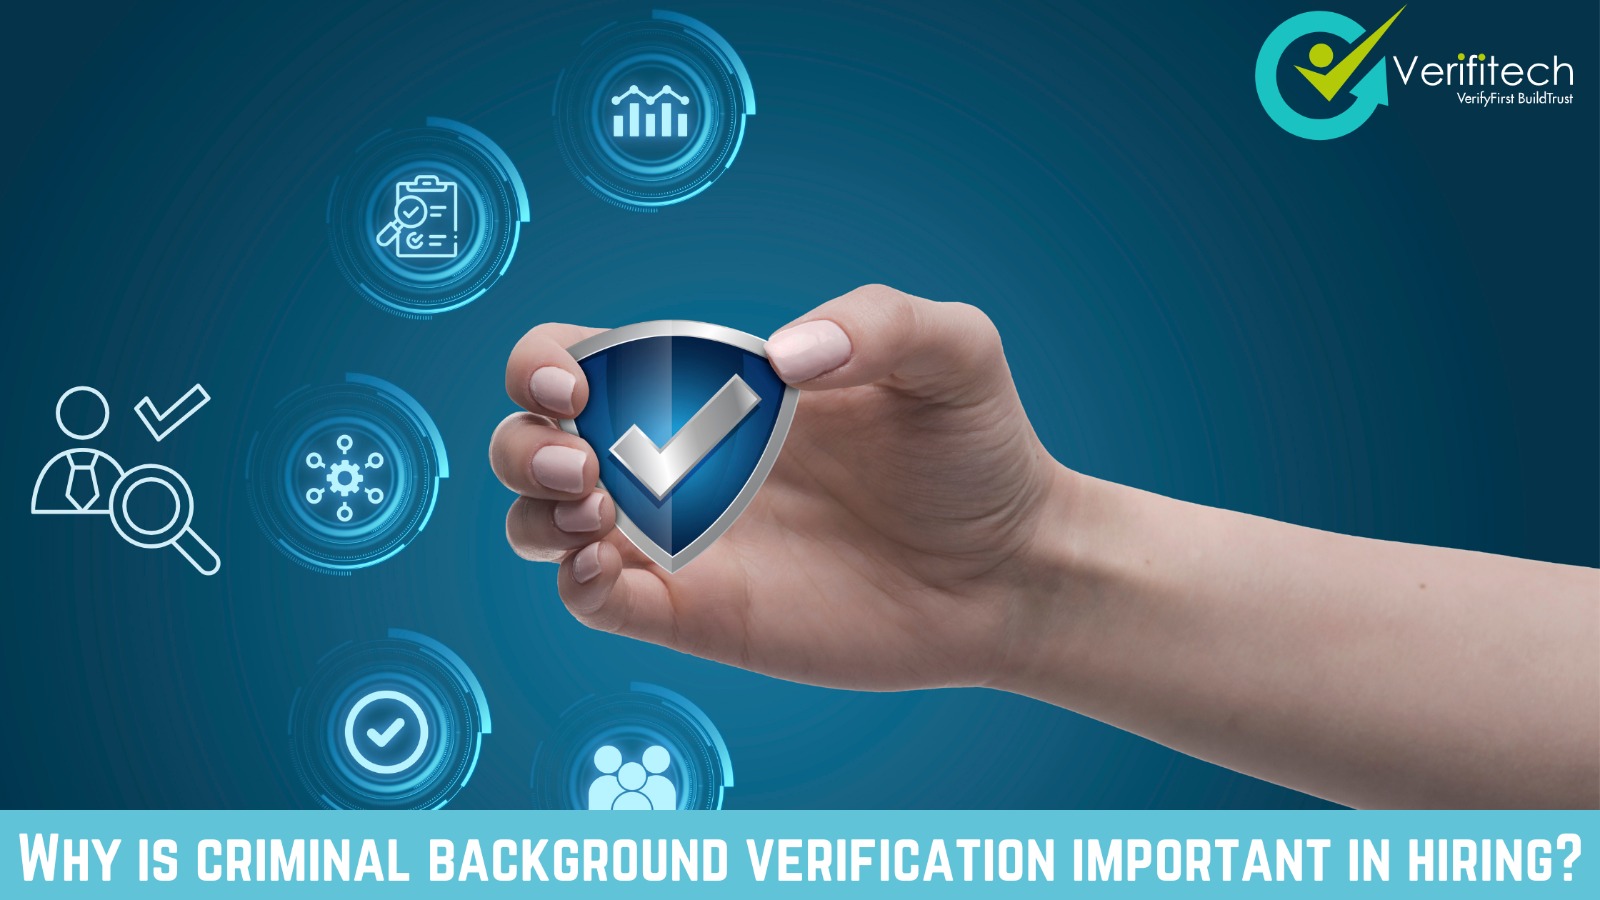 Why is criminal background verification important in hiring?